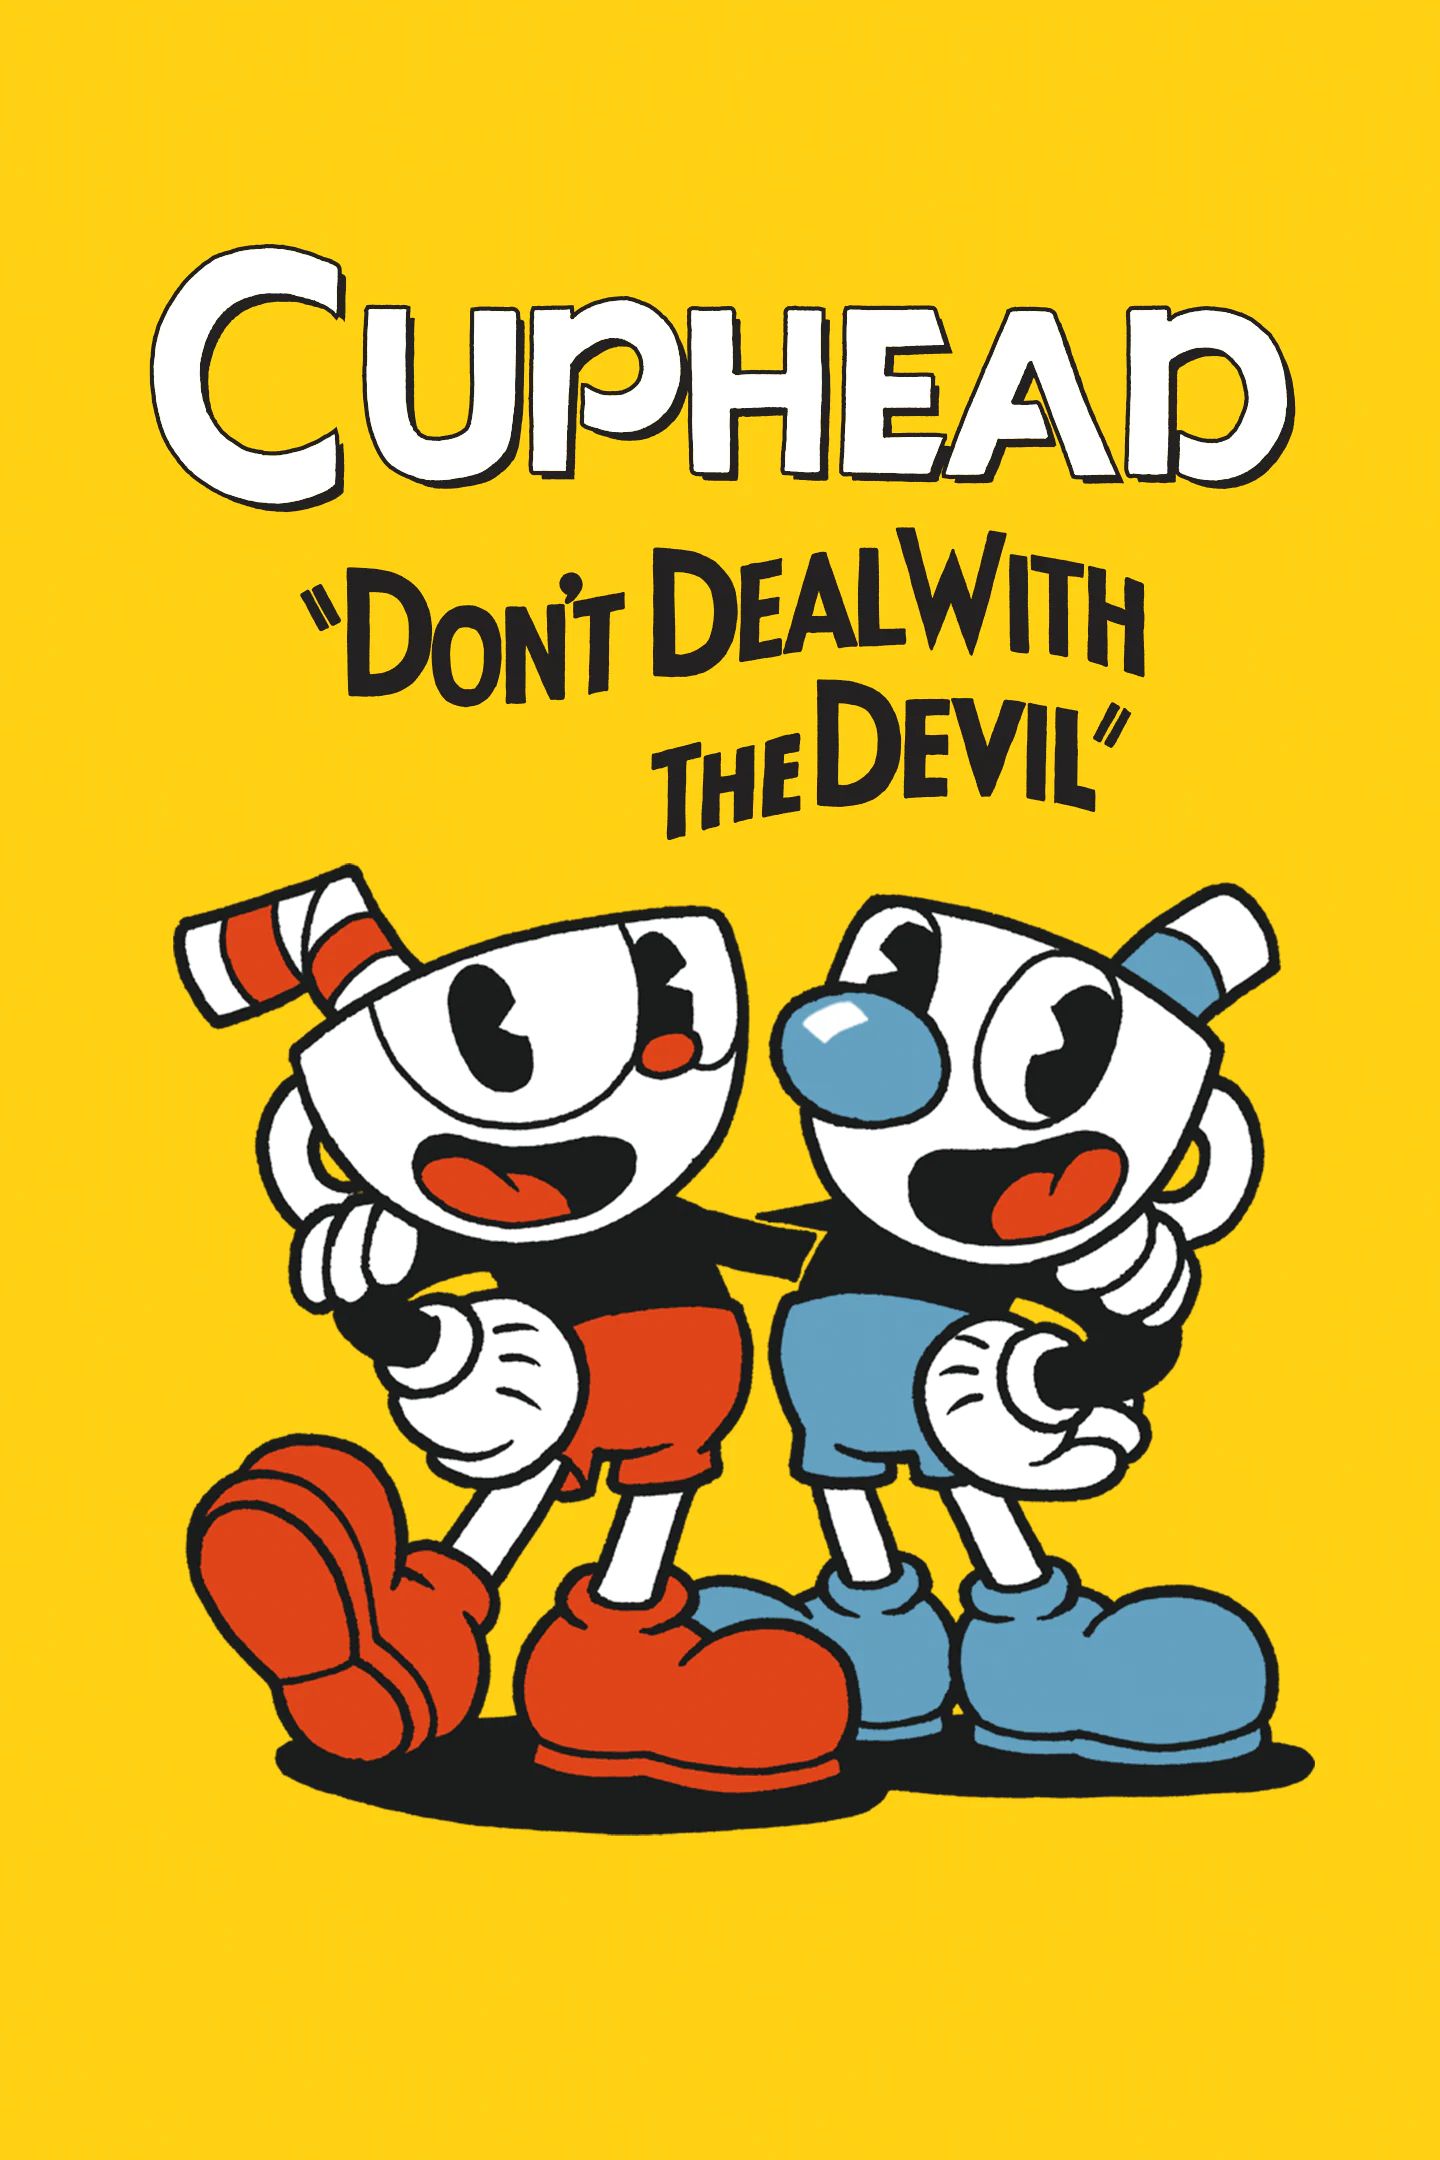 Cuphead game poster